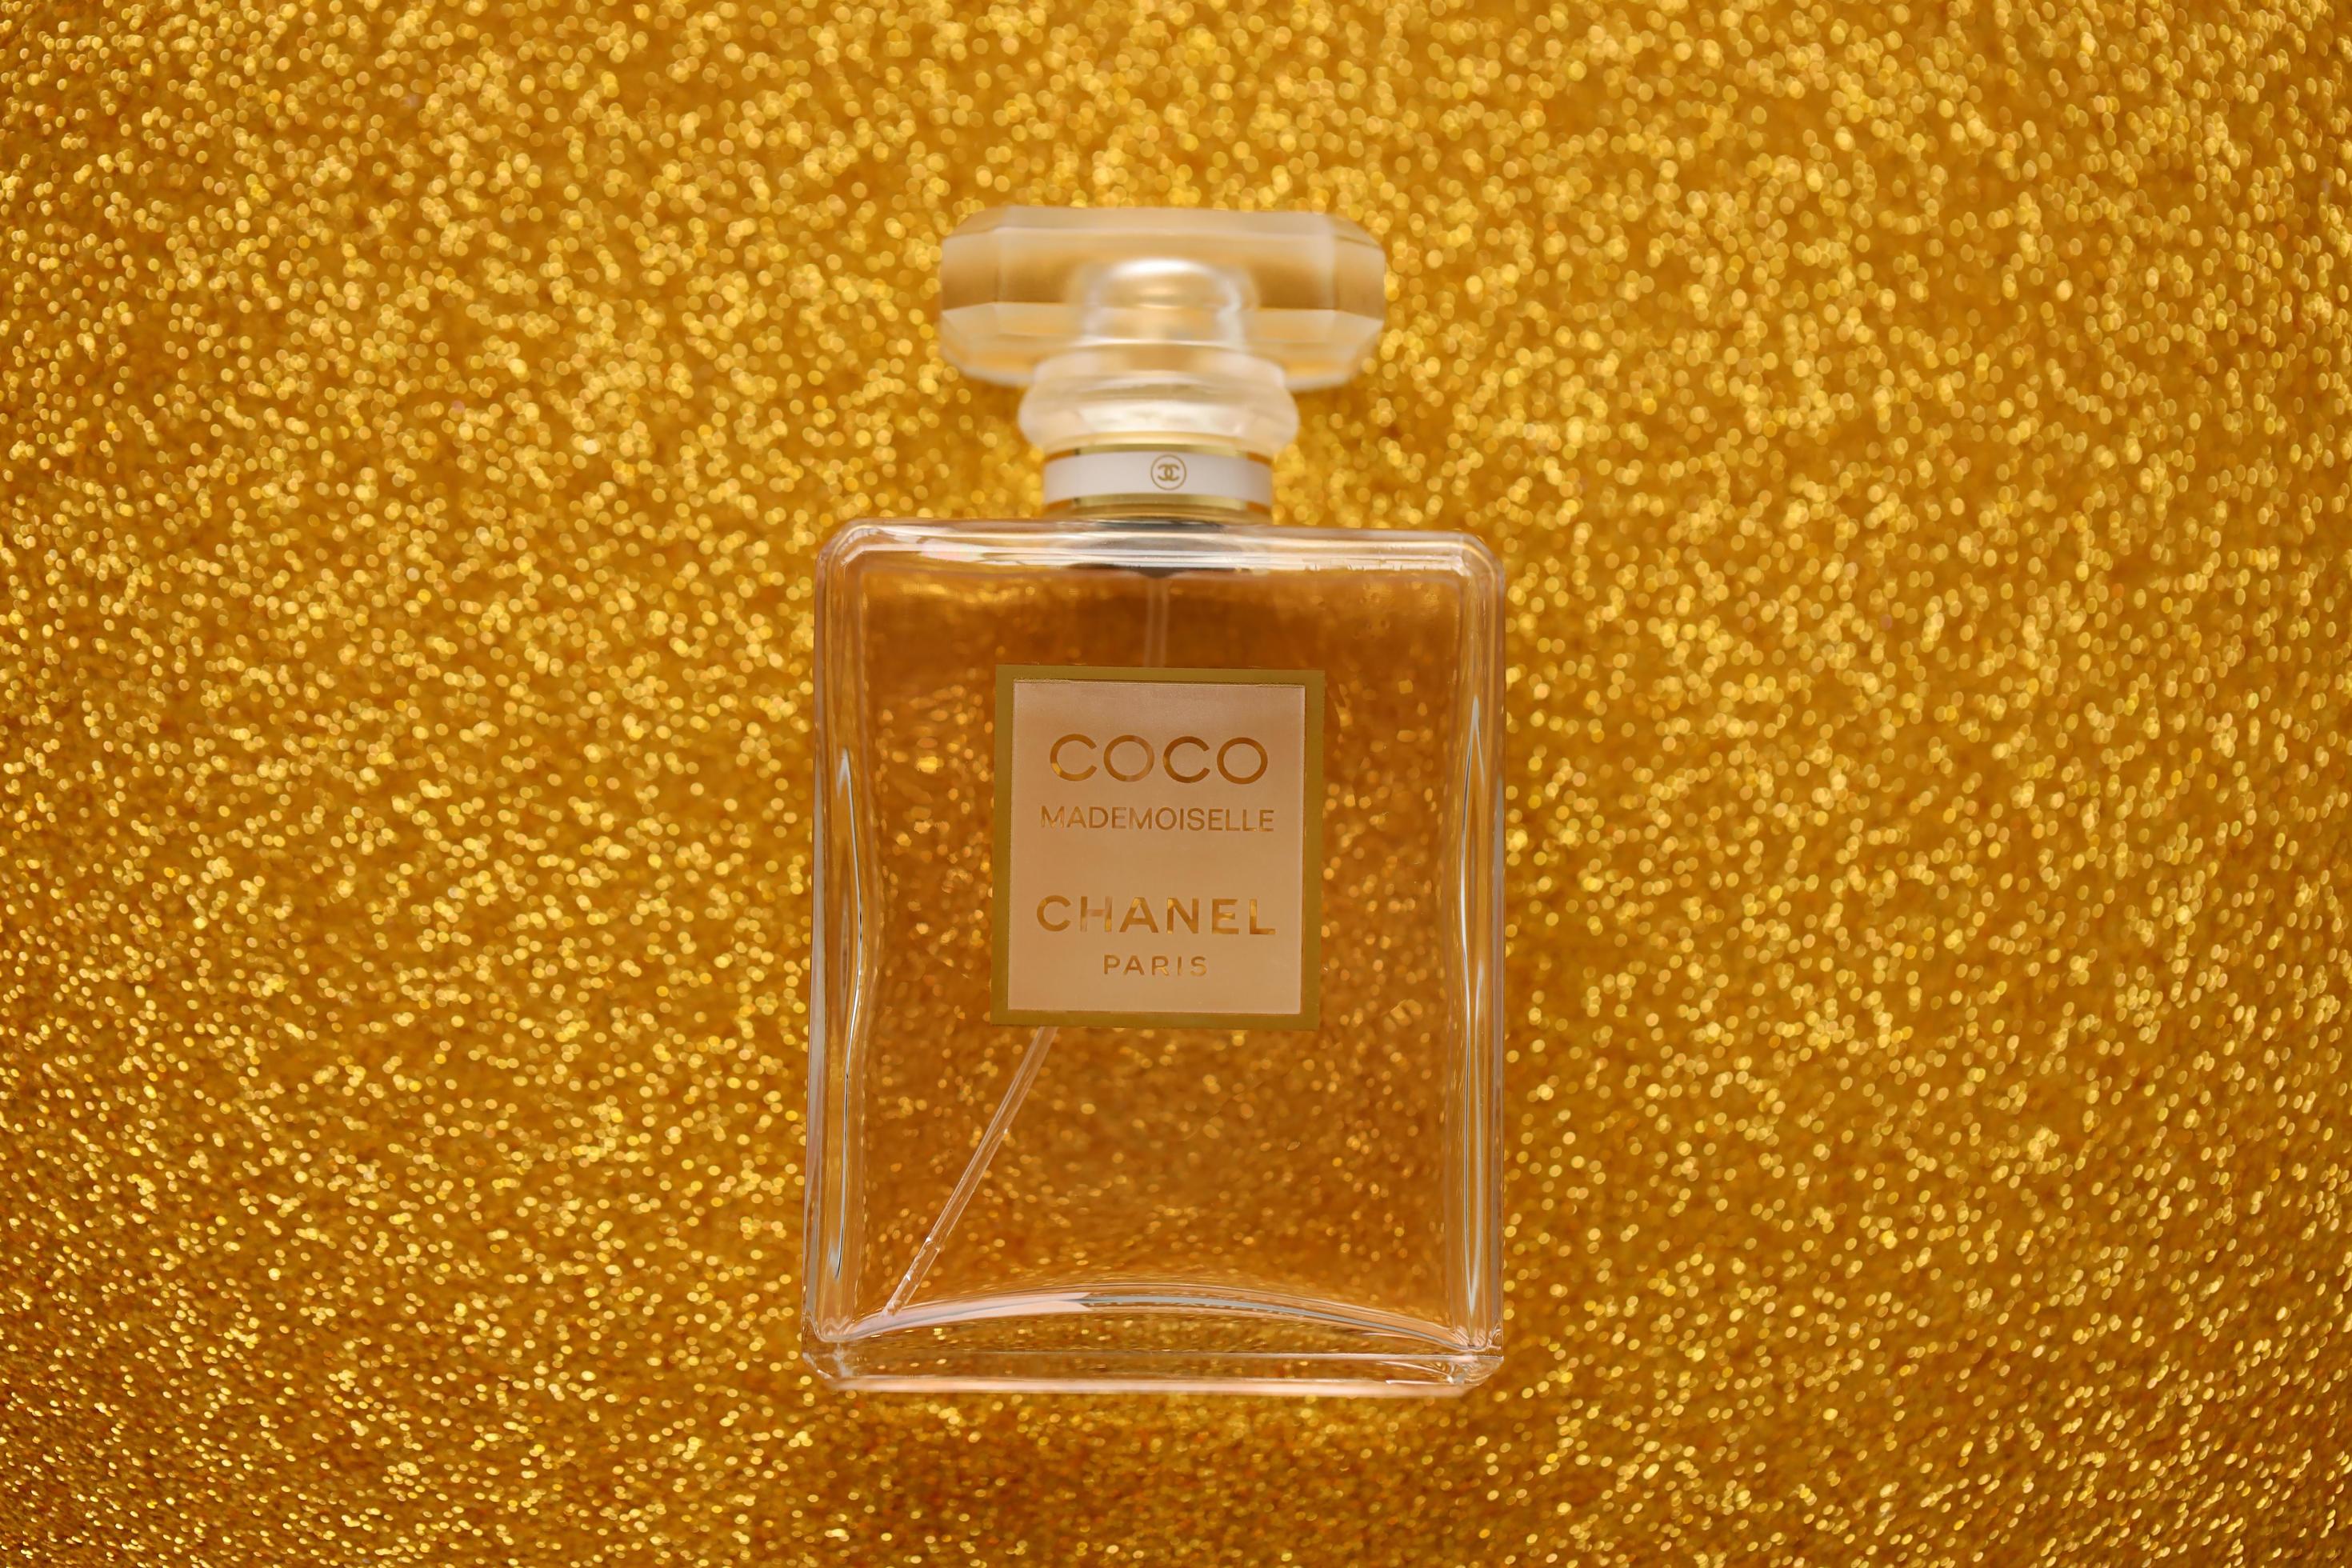 TERNOPIL, UKRAINE - SEPTEMBER 2, 2022 Chanel Number 5 Eau Premiere worldwide  famous french perfume bottle on shiny glitter background in purple colors  12345886 Stock Photo at Vecteezy